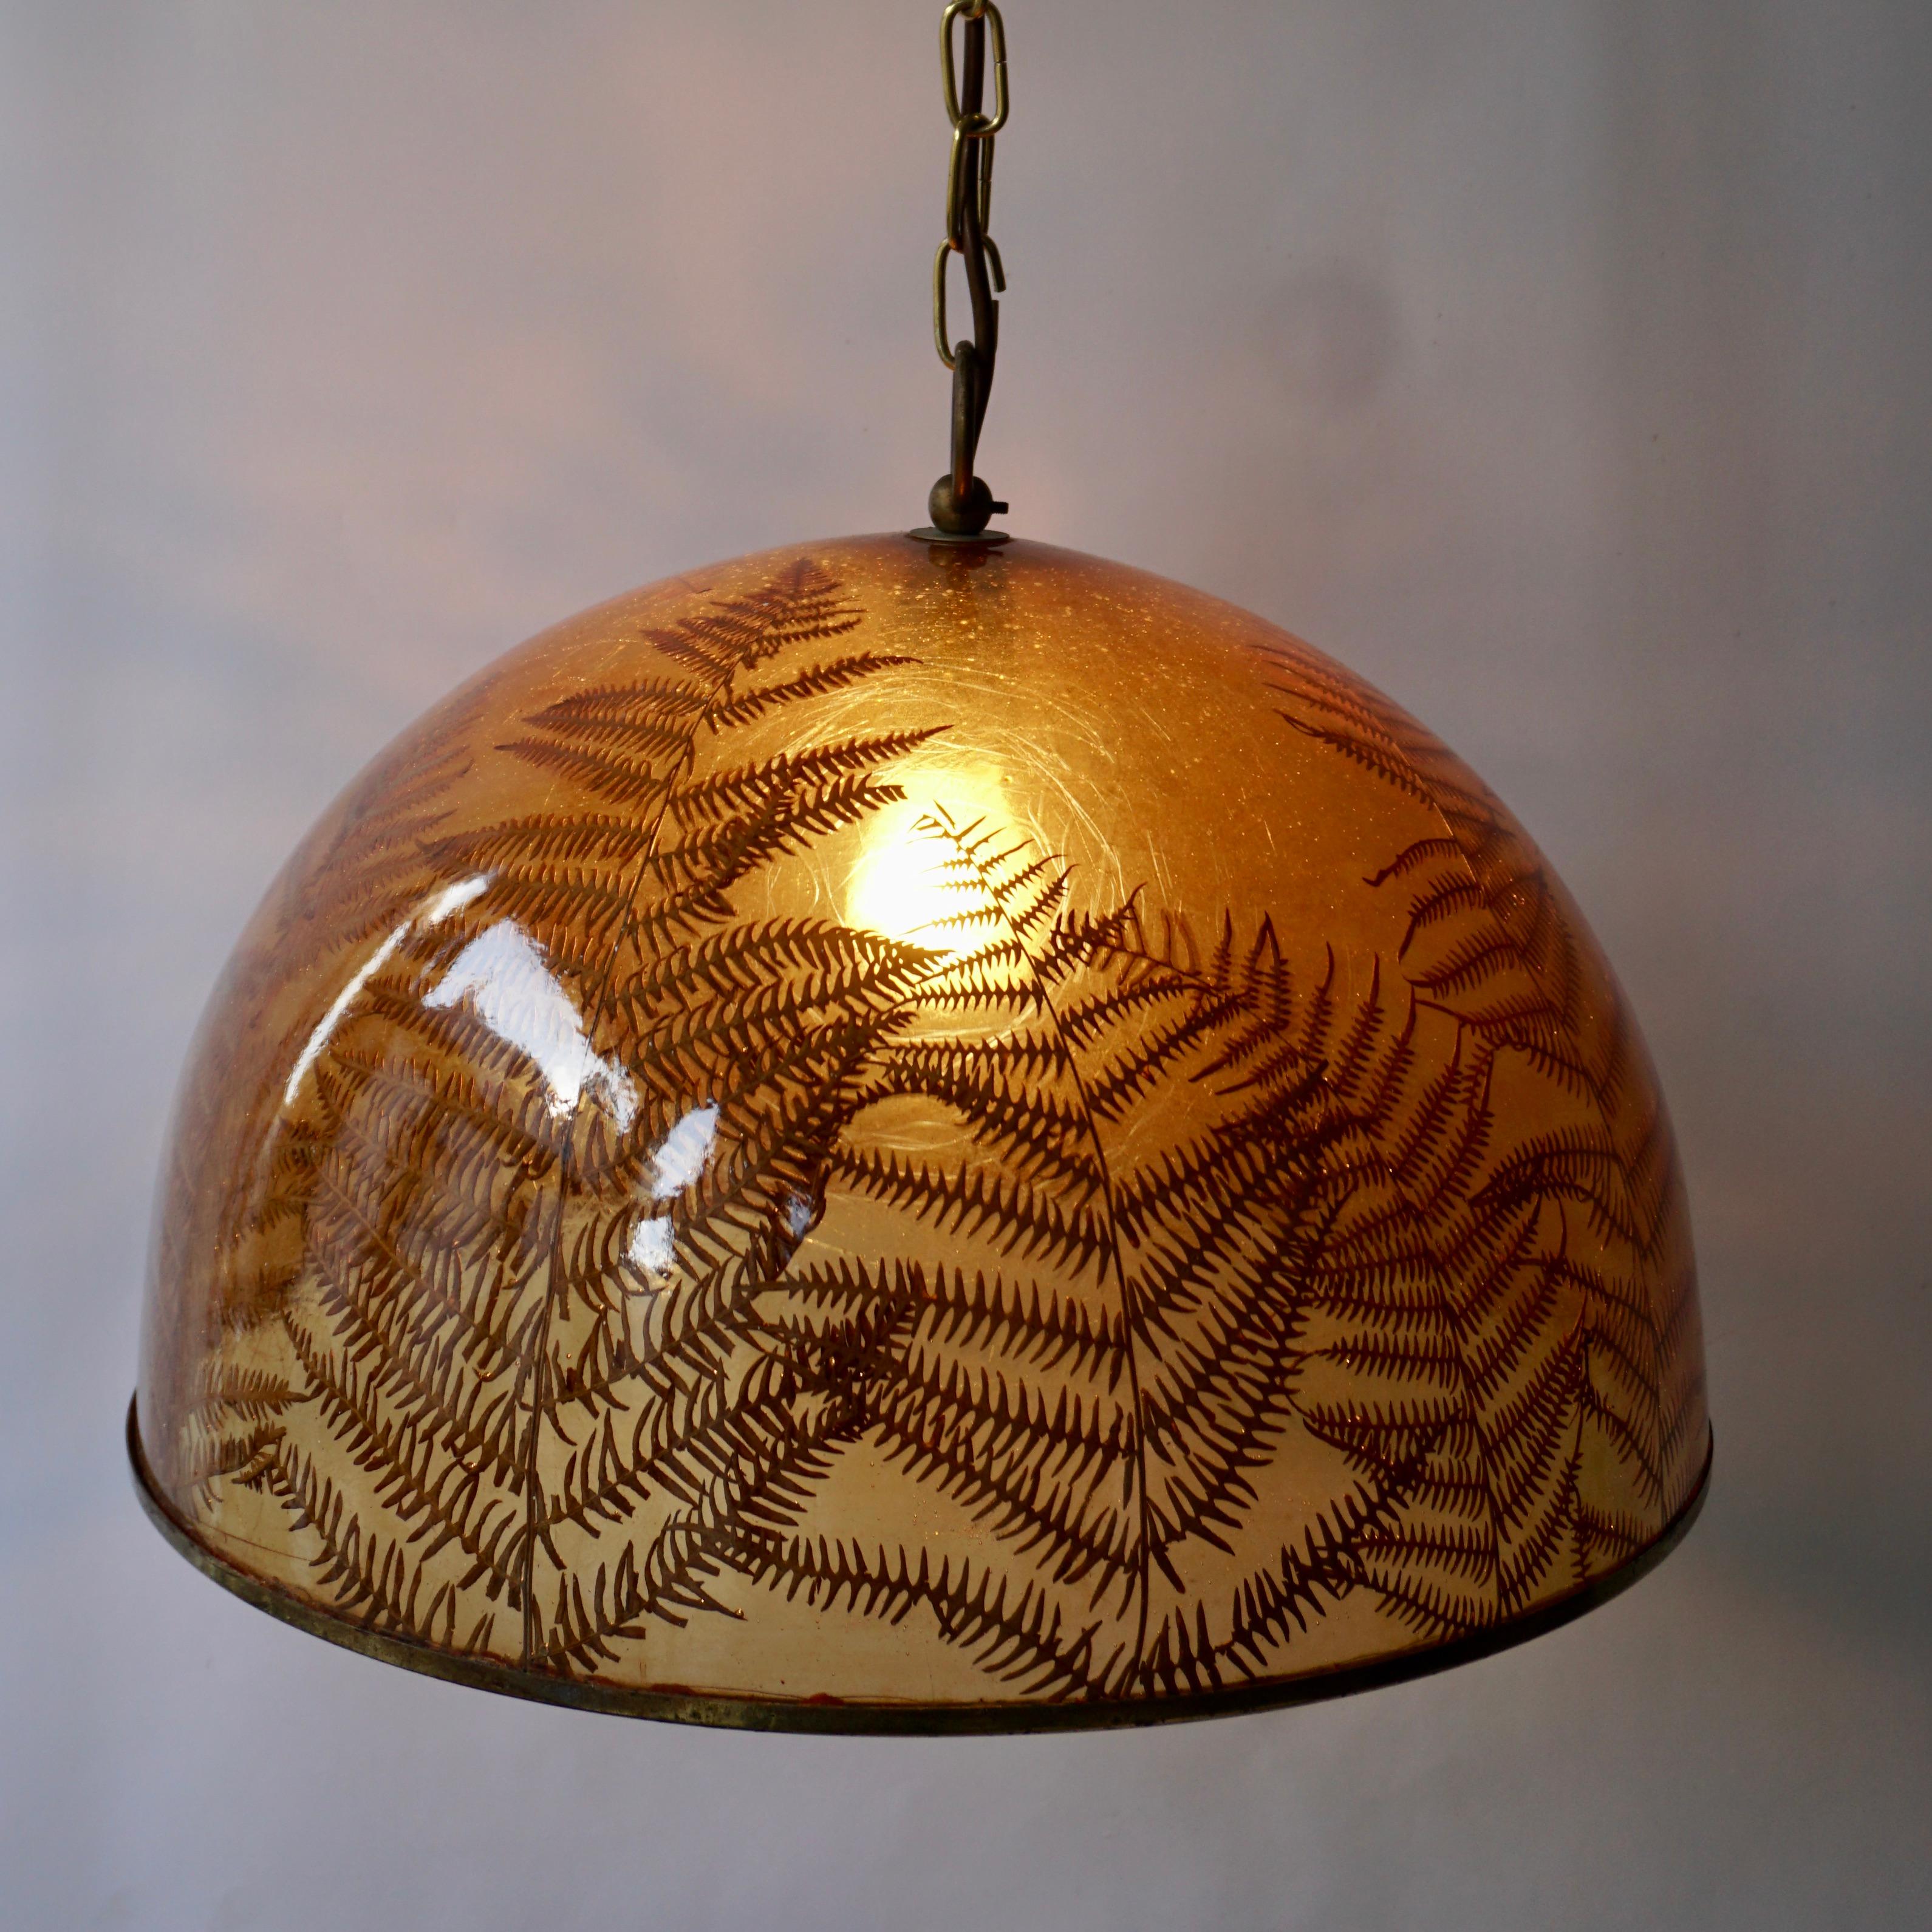 Resin ceiling lamp with real leaves.
Measures: Diameter 46 cm.
Height fixture 26 cm.
The total height is 85 cm with the chain. (Can be shortened).